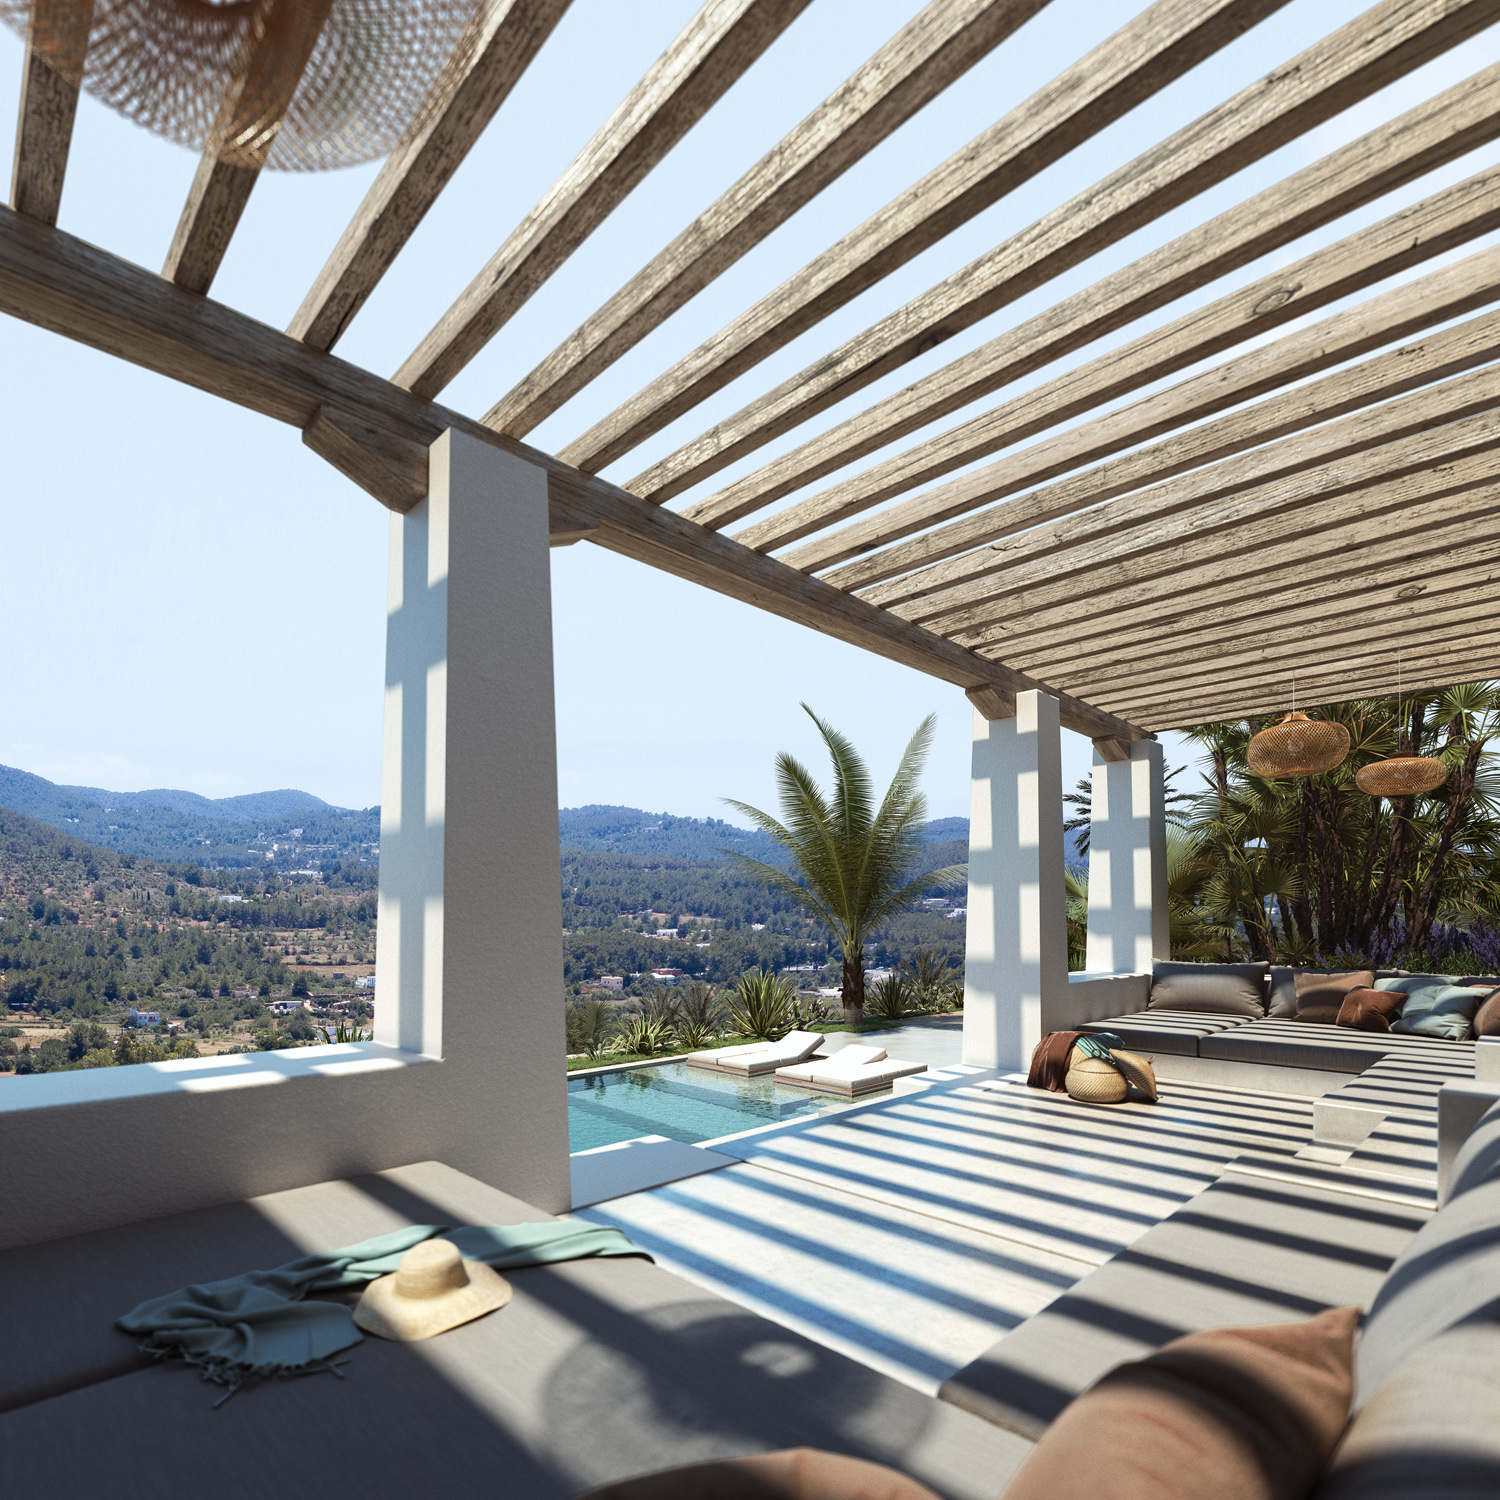 Render showing a luxury villa for sale in Ibiza